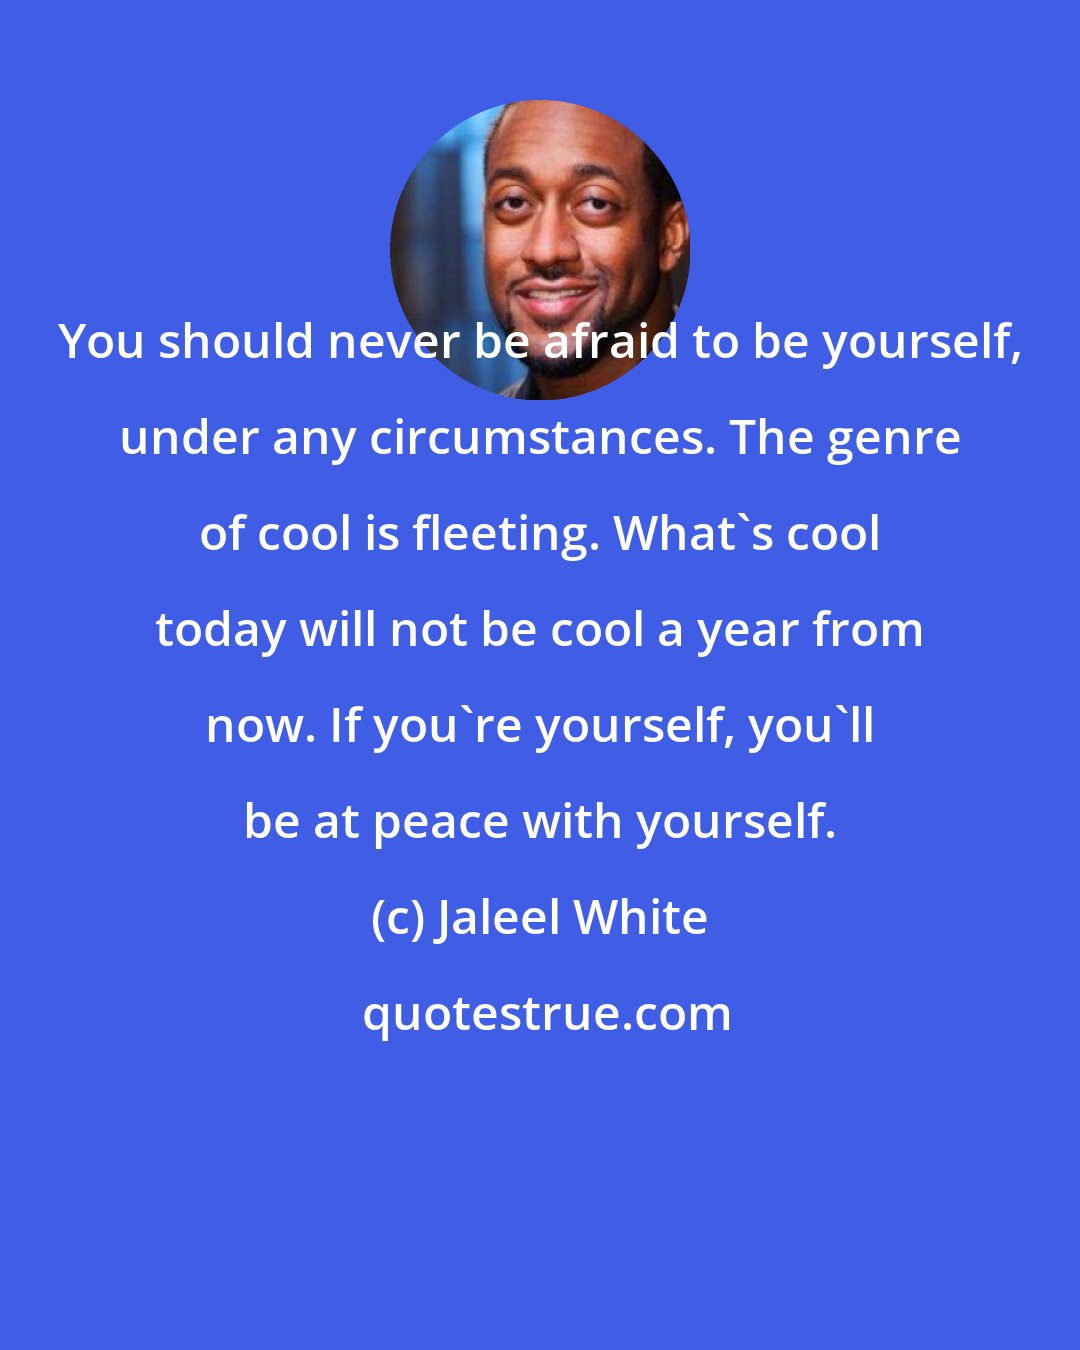 Jaleel White: You should never be afraid to be yourself, under any circumstances. The genre of cool is fleeting. What's cool today will not be cool a year from now. If you're yourself, you'll be at peace with yourself.